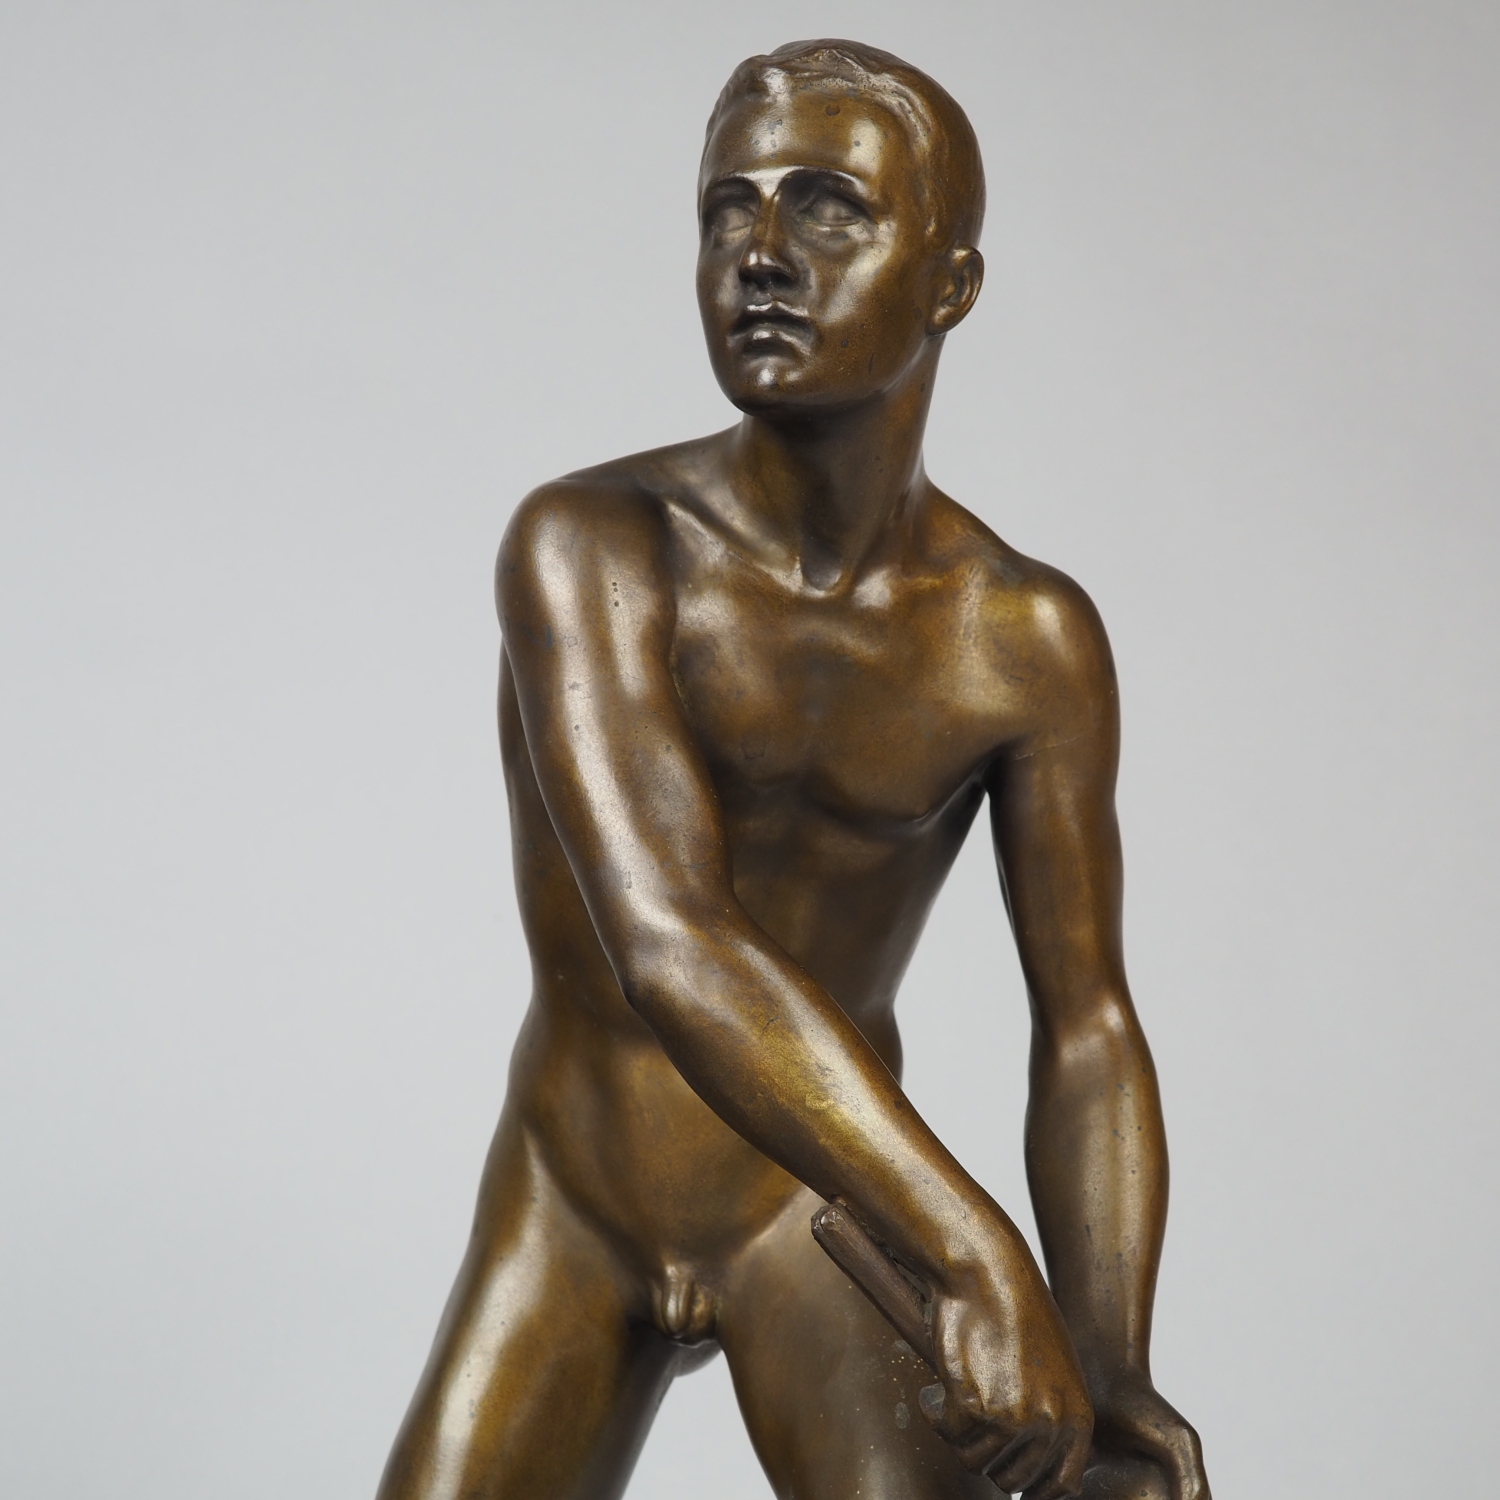 Male Nude of a Relay Runner by August Kattentidt ca. 1930 - Image 5 of 6